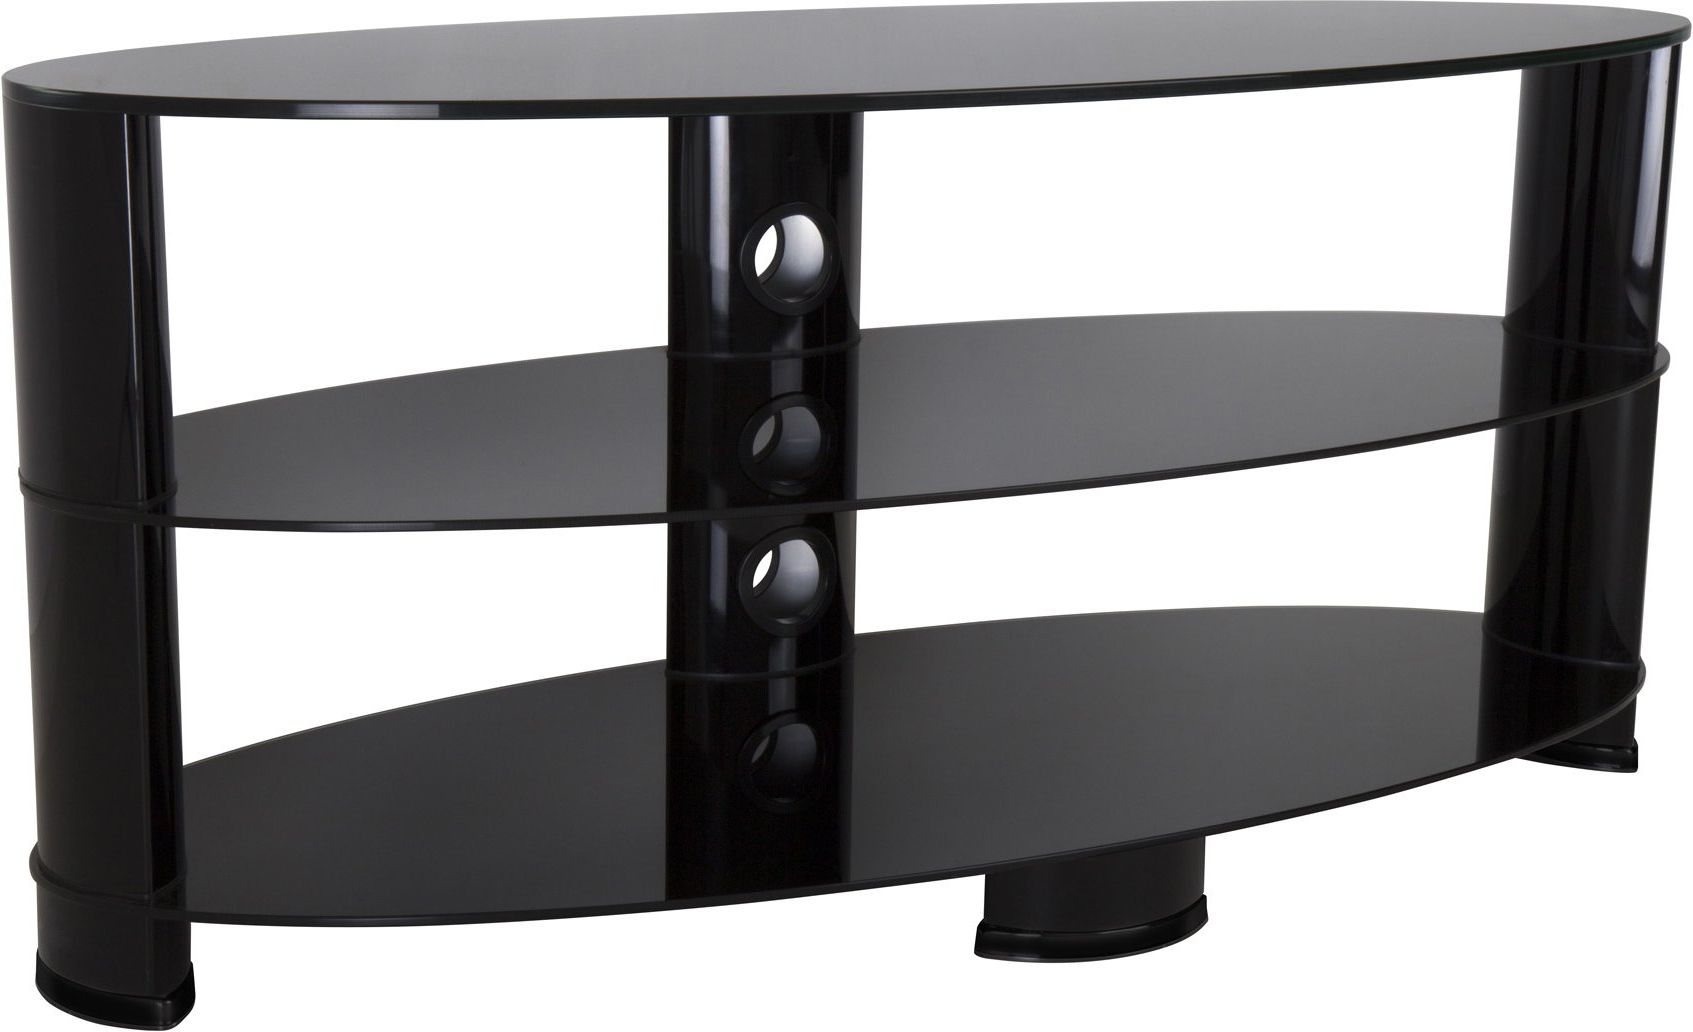 Glass Shelves Tv Stands For Tvs Up To 60" With Regard To Preferred Avf Ovl1200bb Oval Glass Tv Stand For Tvs Up To 55 Inch (View 4 of 10)